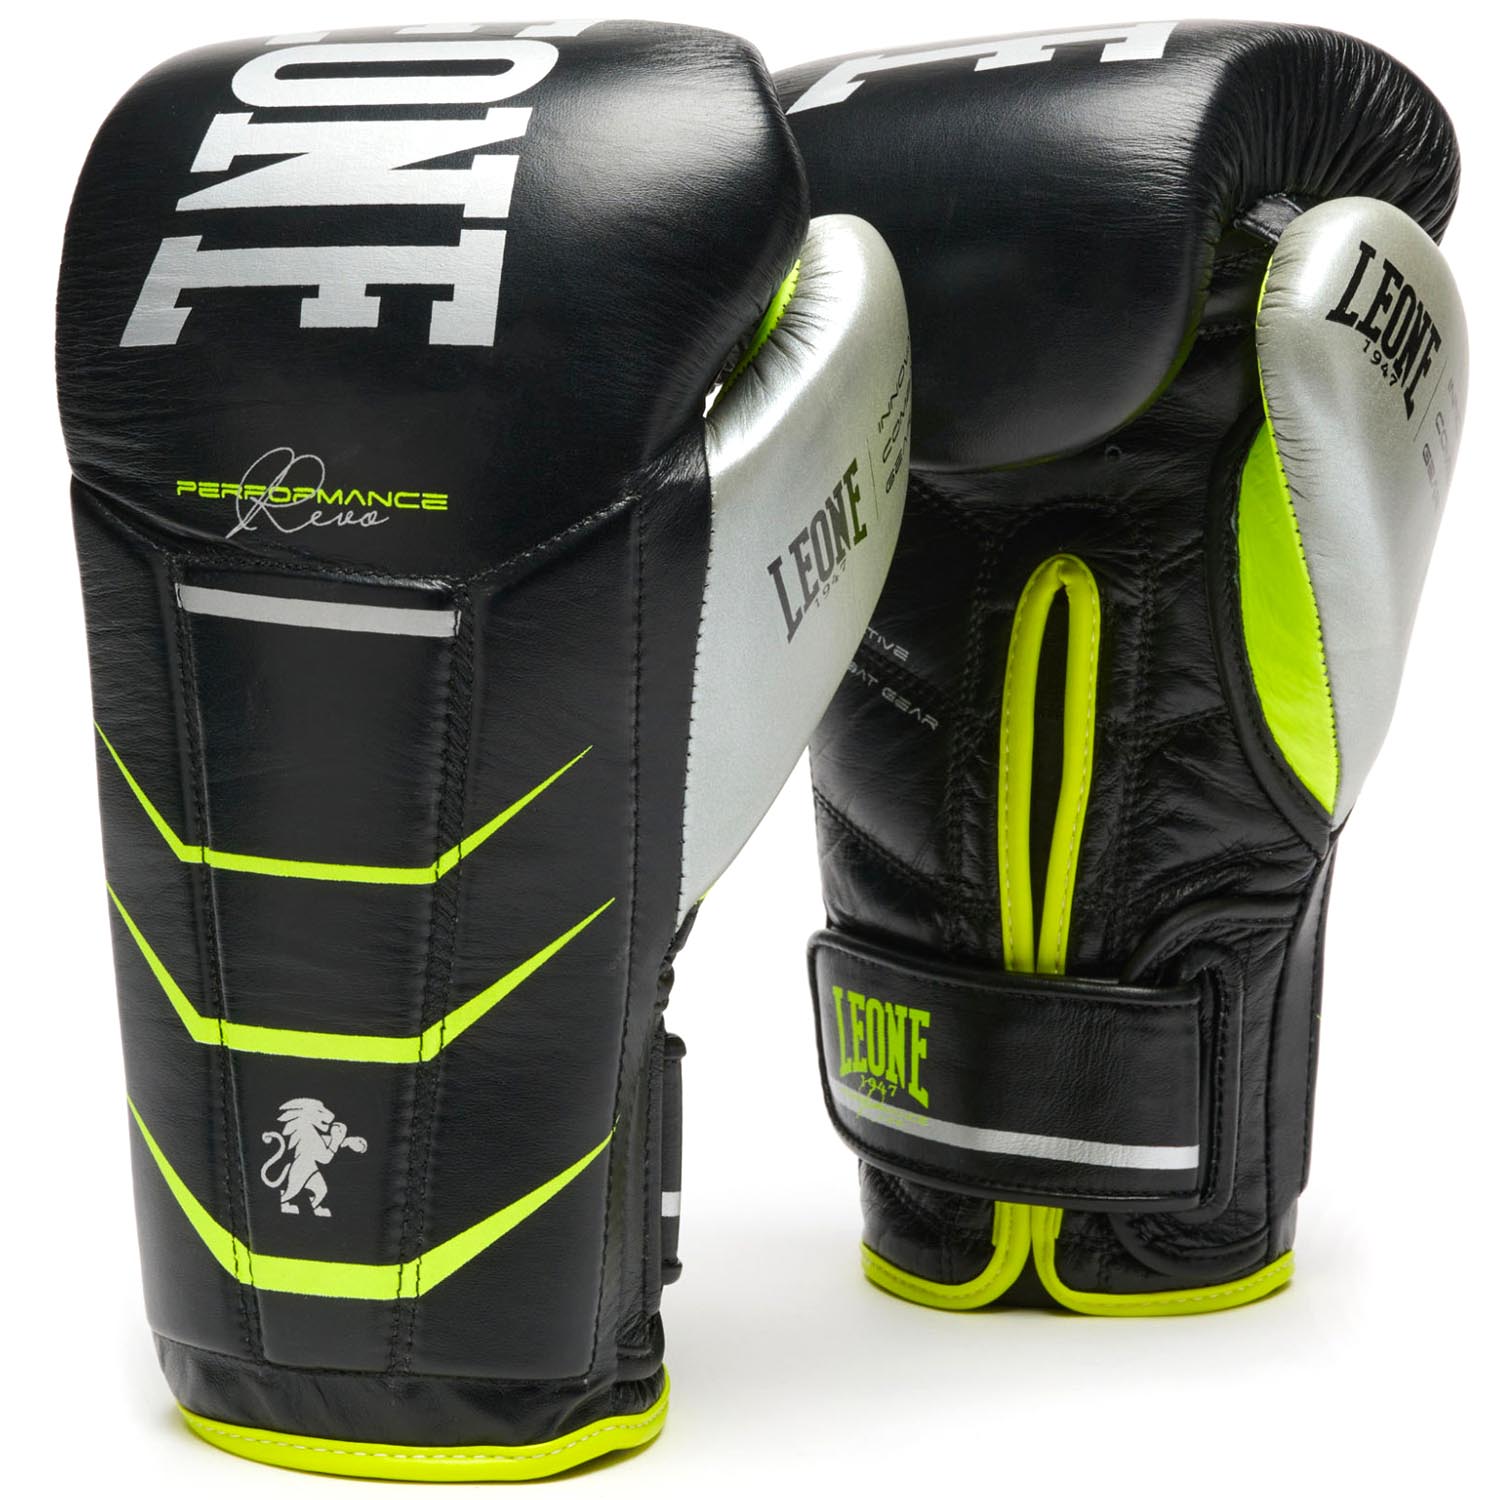 Leather Boxing Gloves  buy a huge selection of brands in our Shop